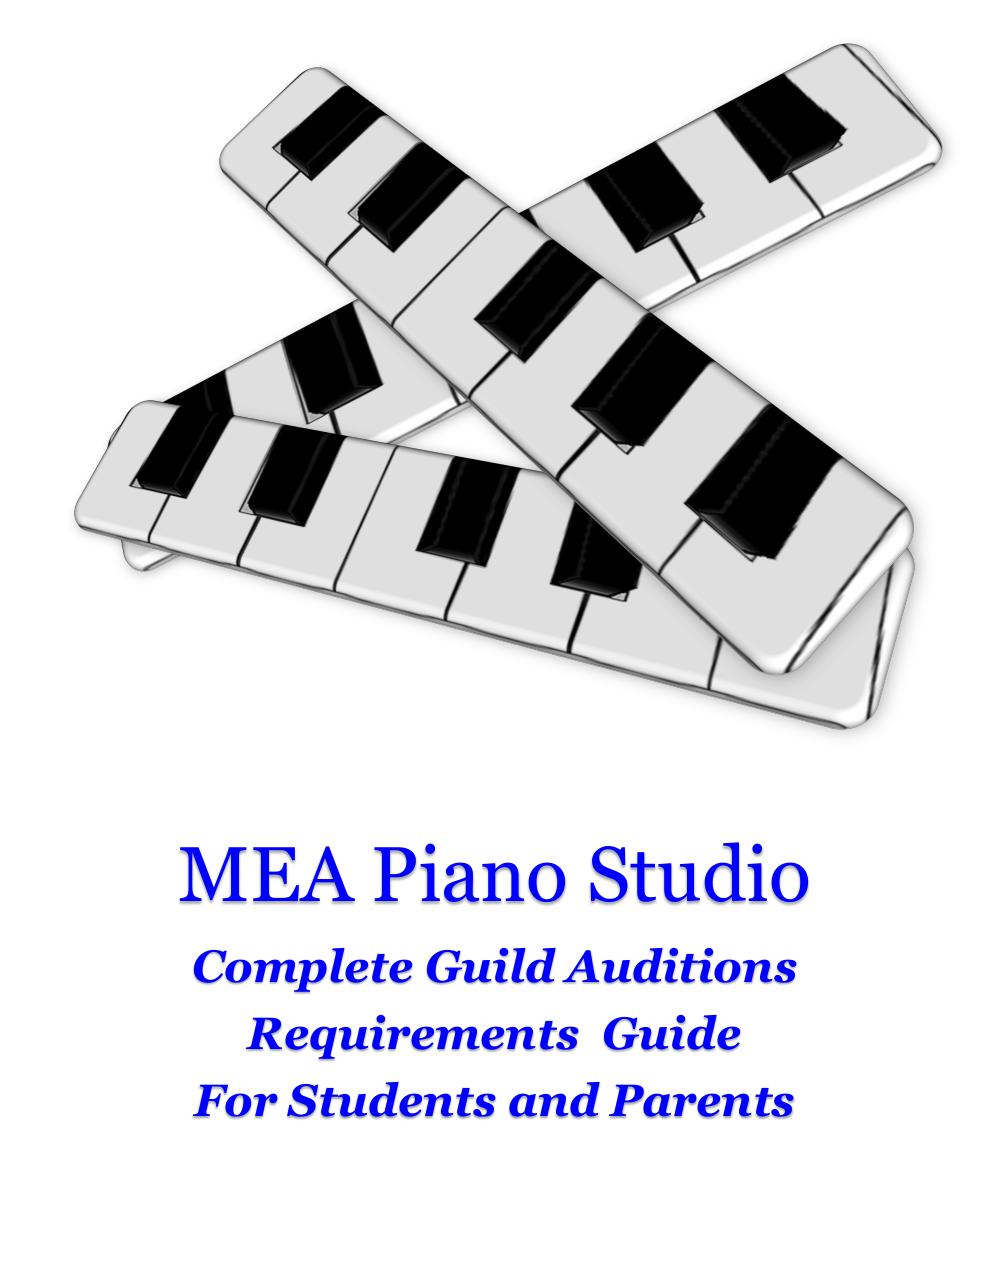 Guild Auditions Requirements for MEA Piano Studio.pdf - page 1/7